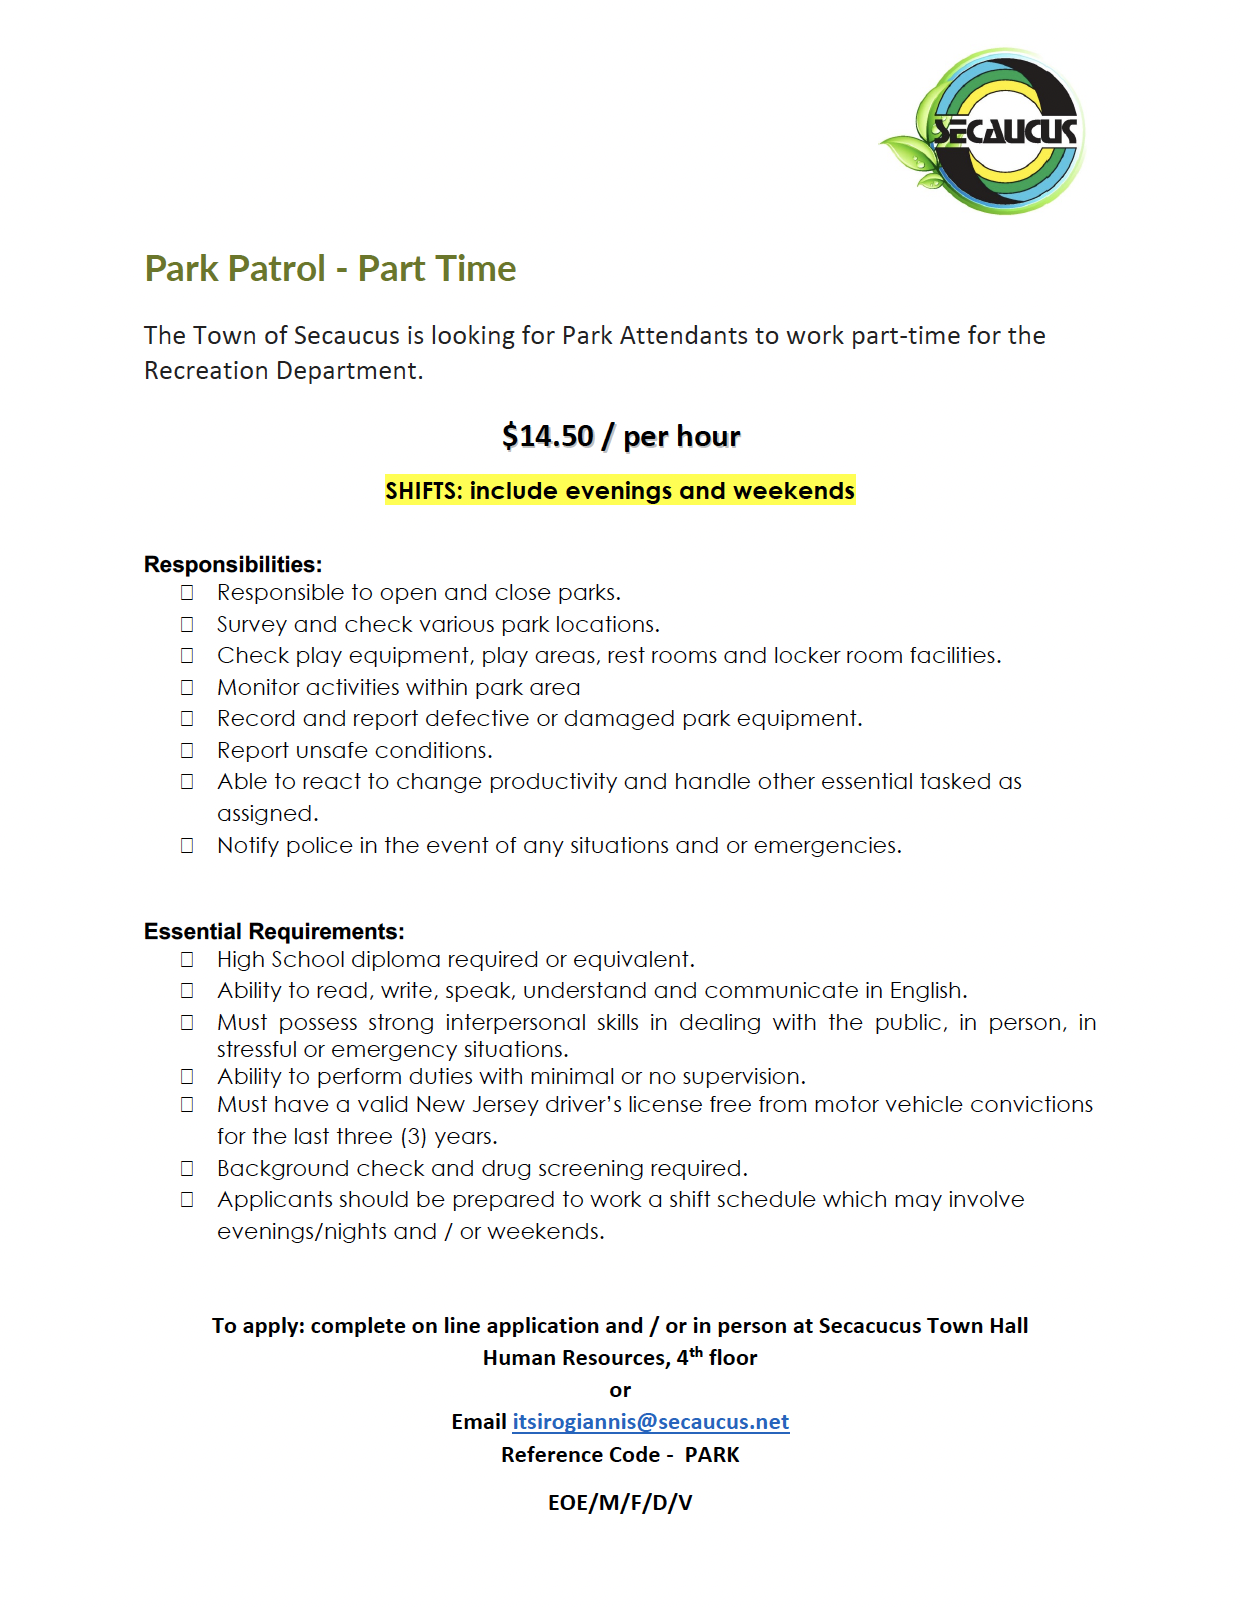 Part-Time Park Patrol Opportunity Available